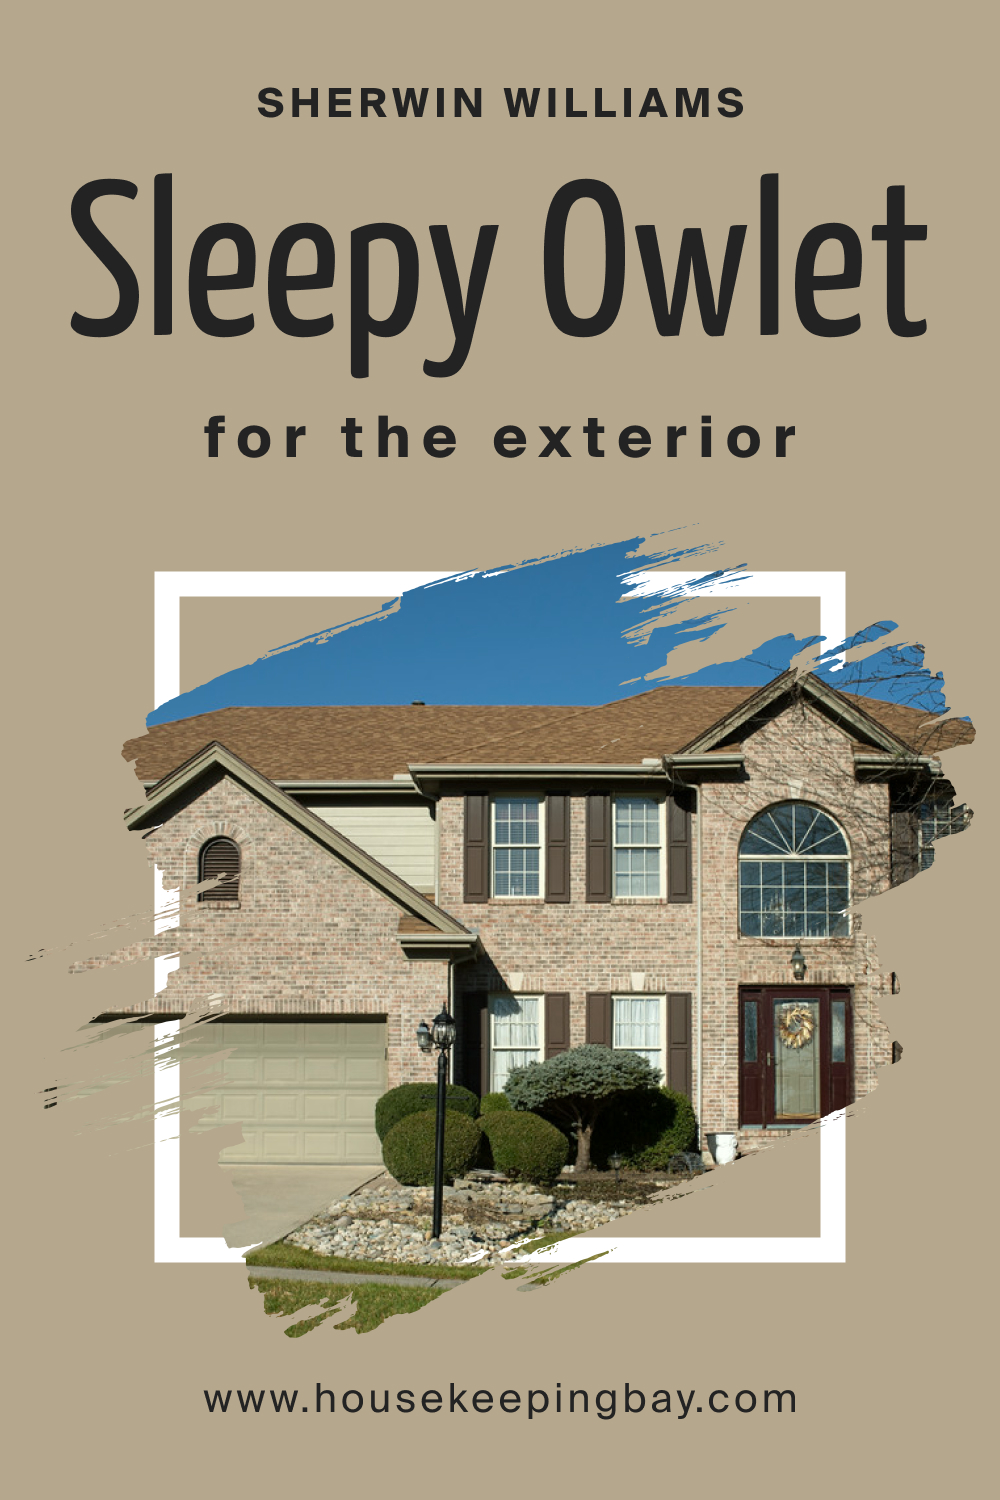 Sherwin Williams. SW 9513 Sleepy Owlet For the exterior